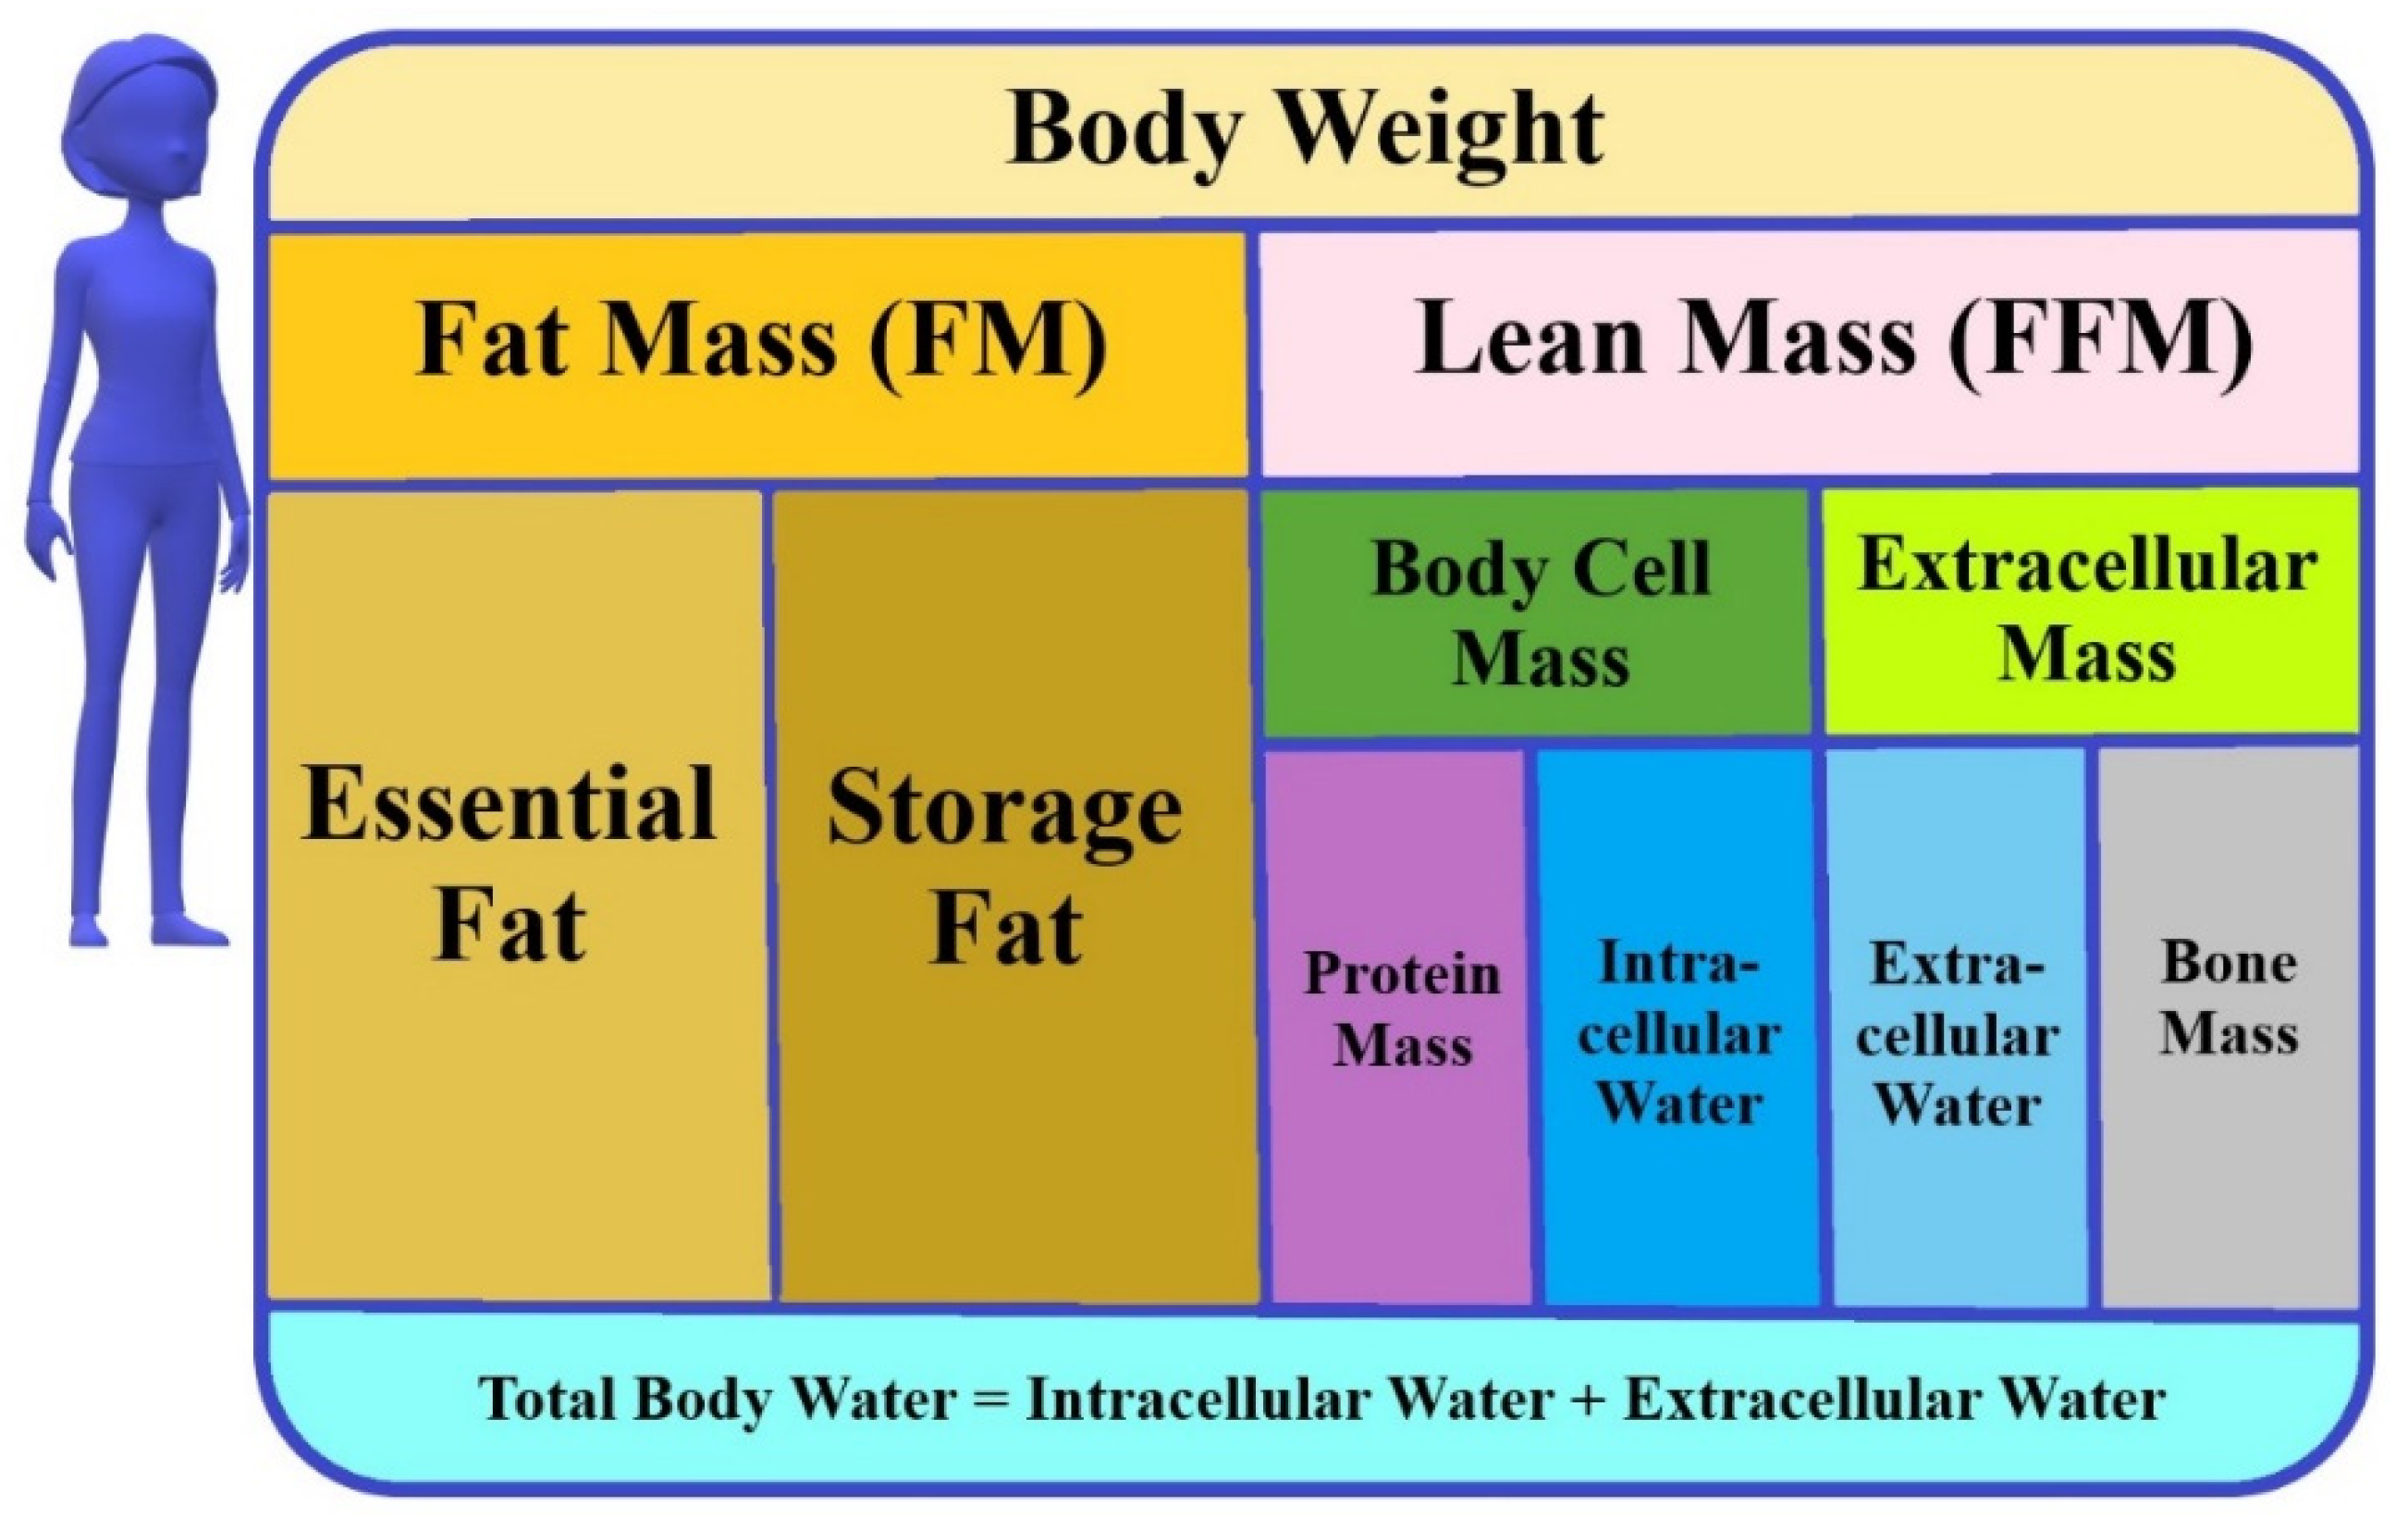 Body composition assessment using bioelectrical impedance analysis